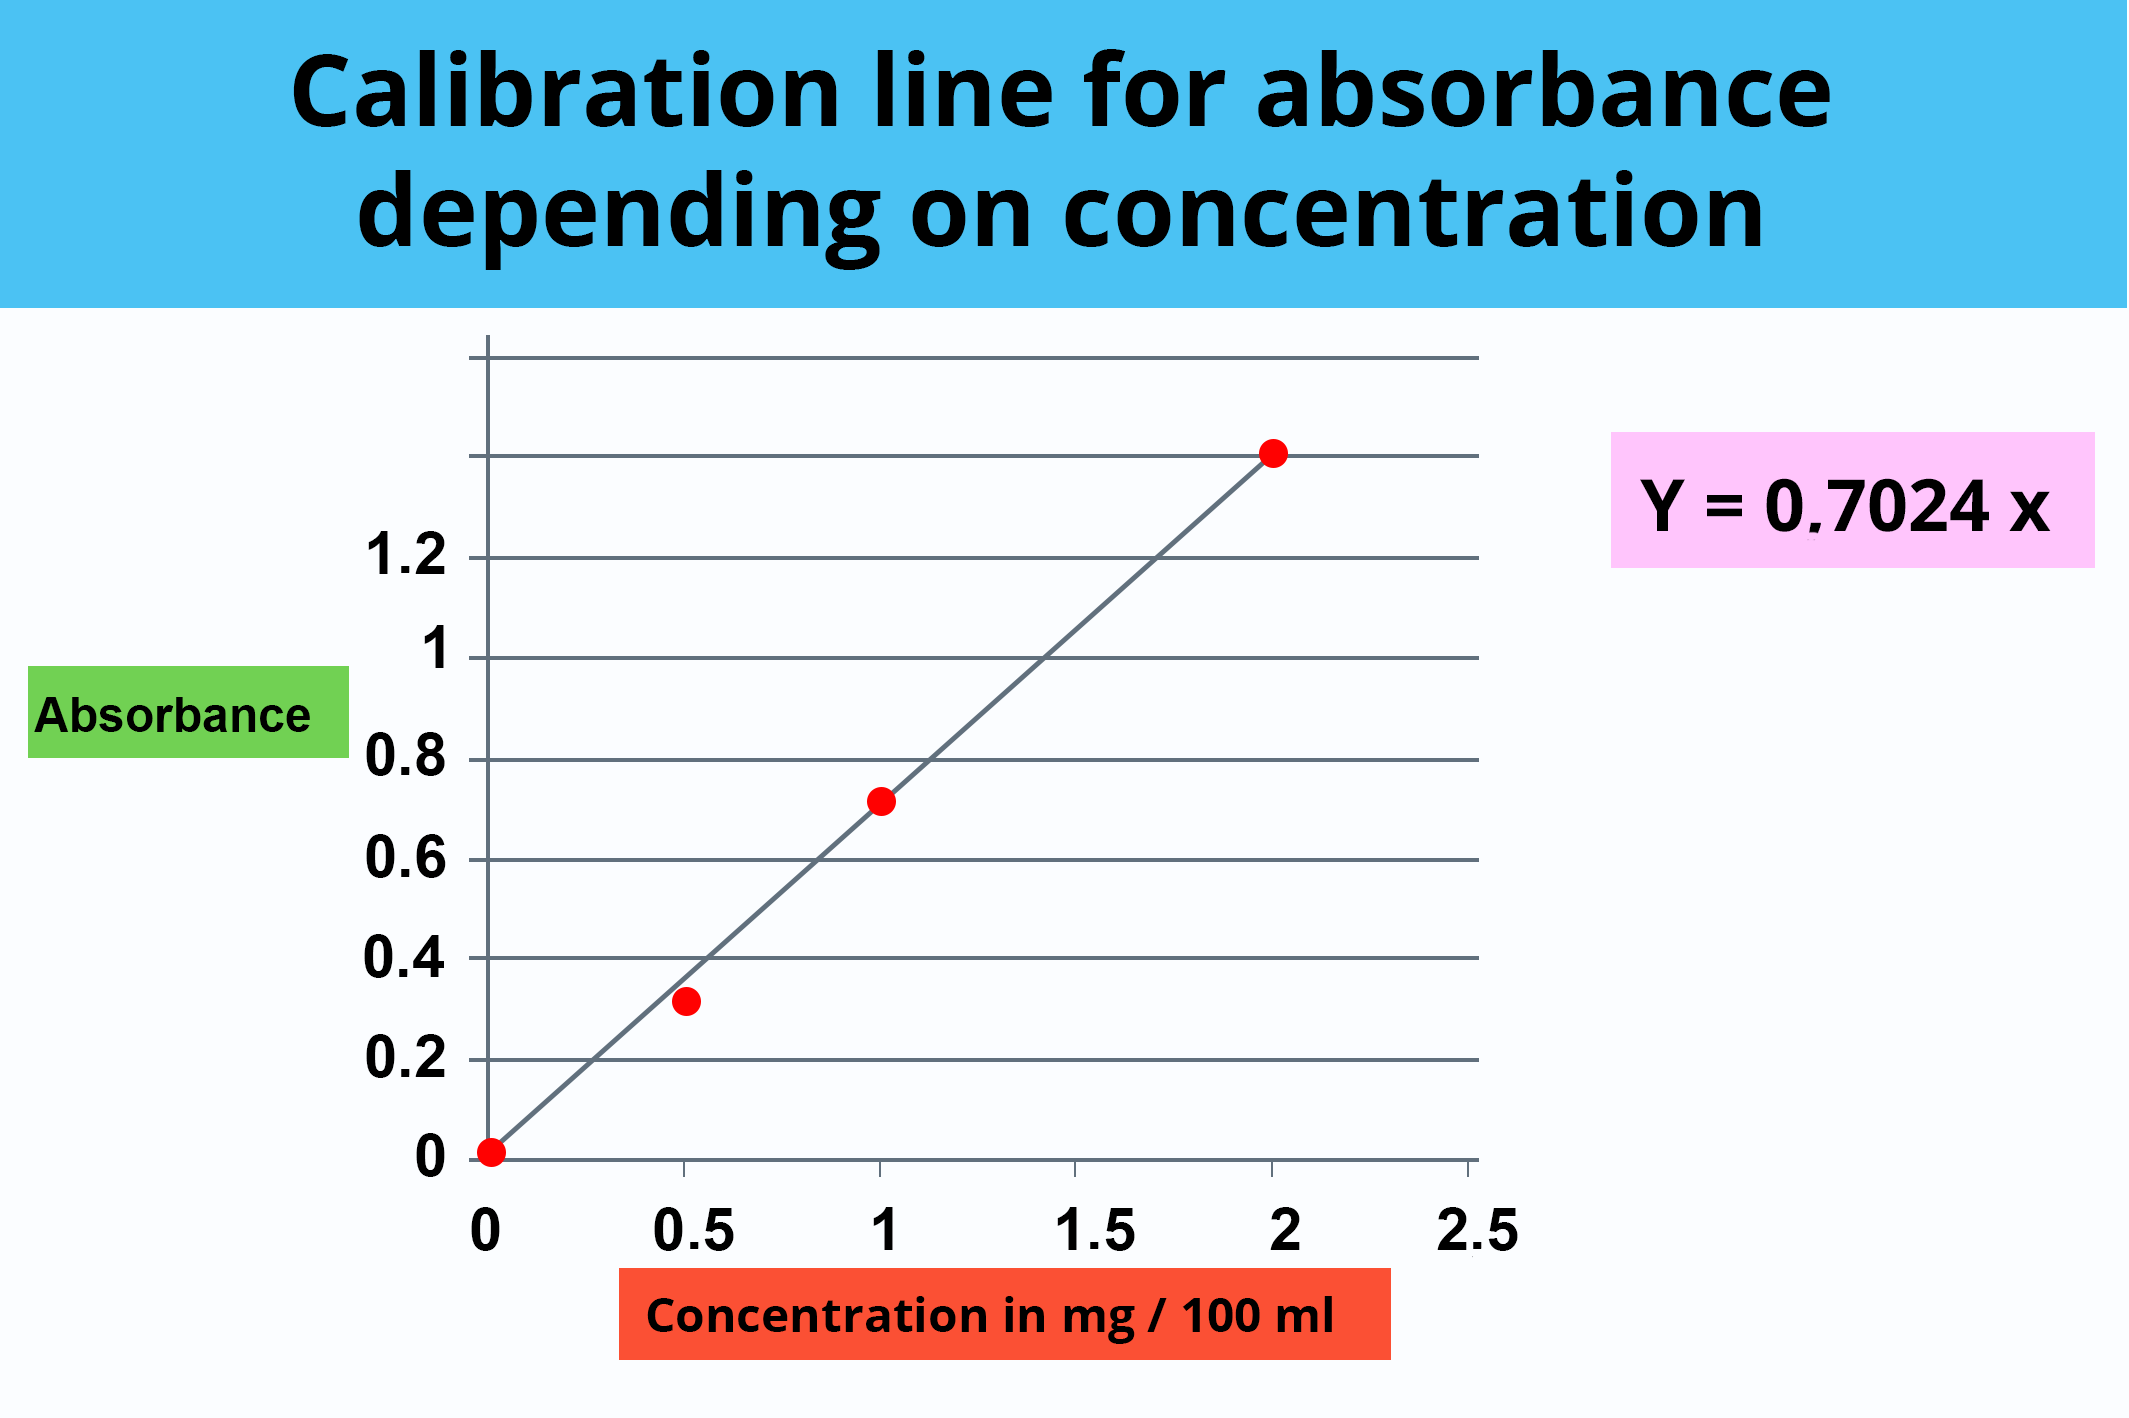 Calibration curve of the absorbance according to the concentration